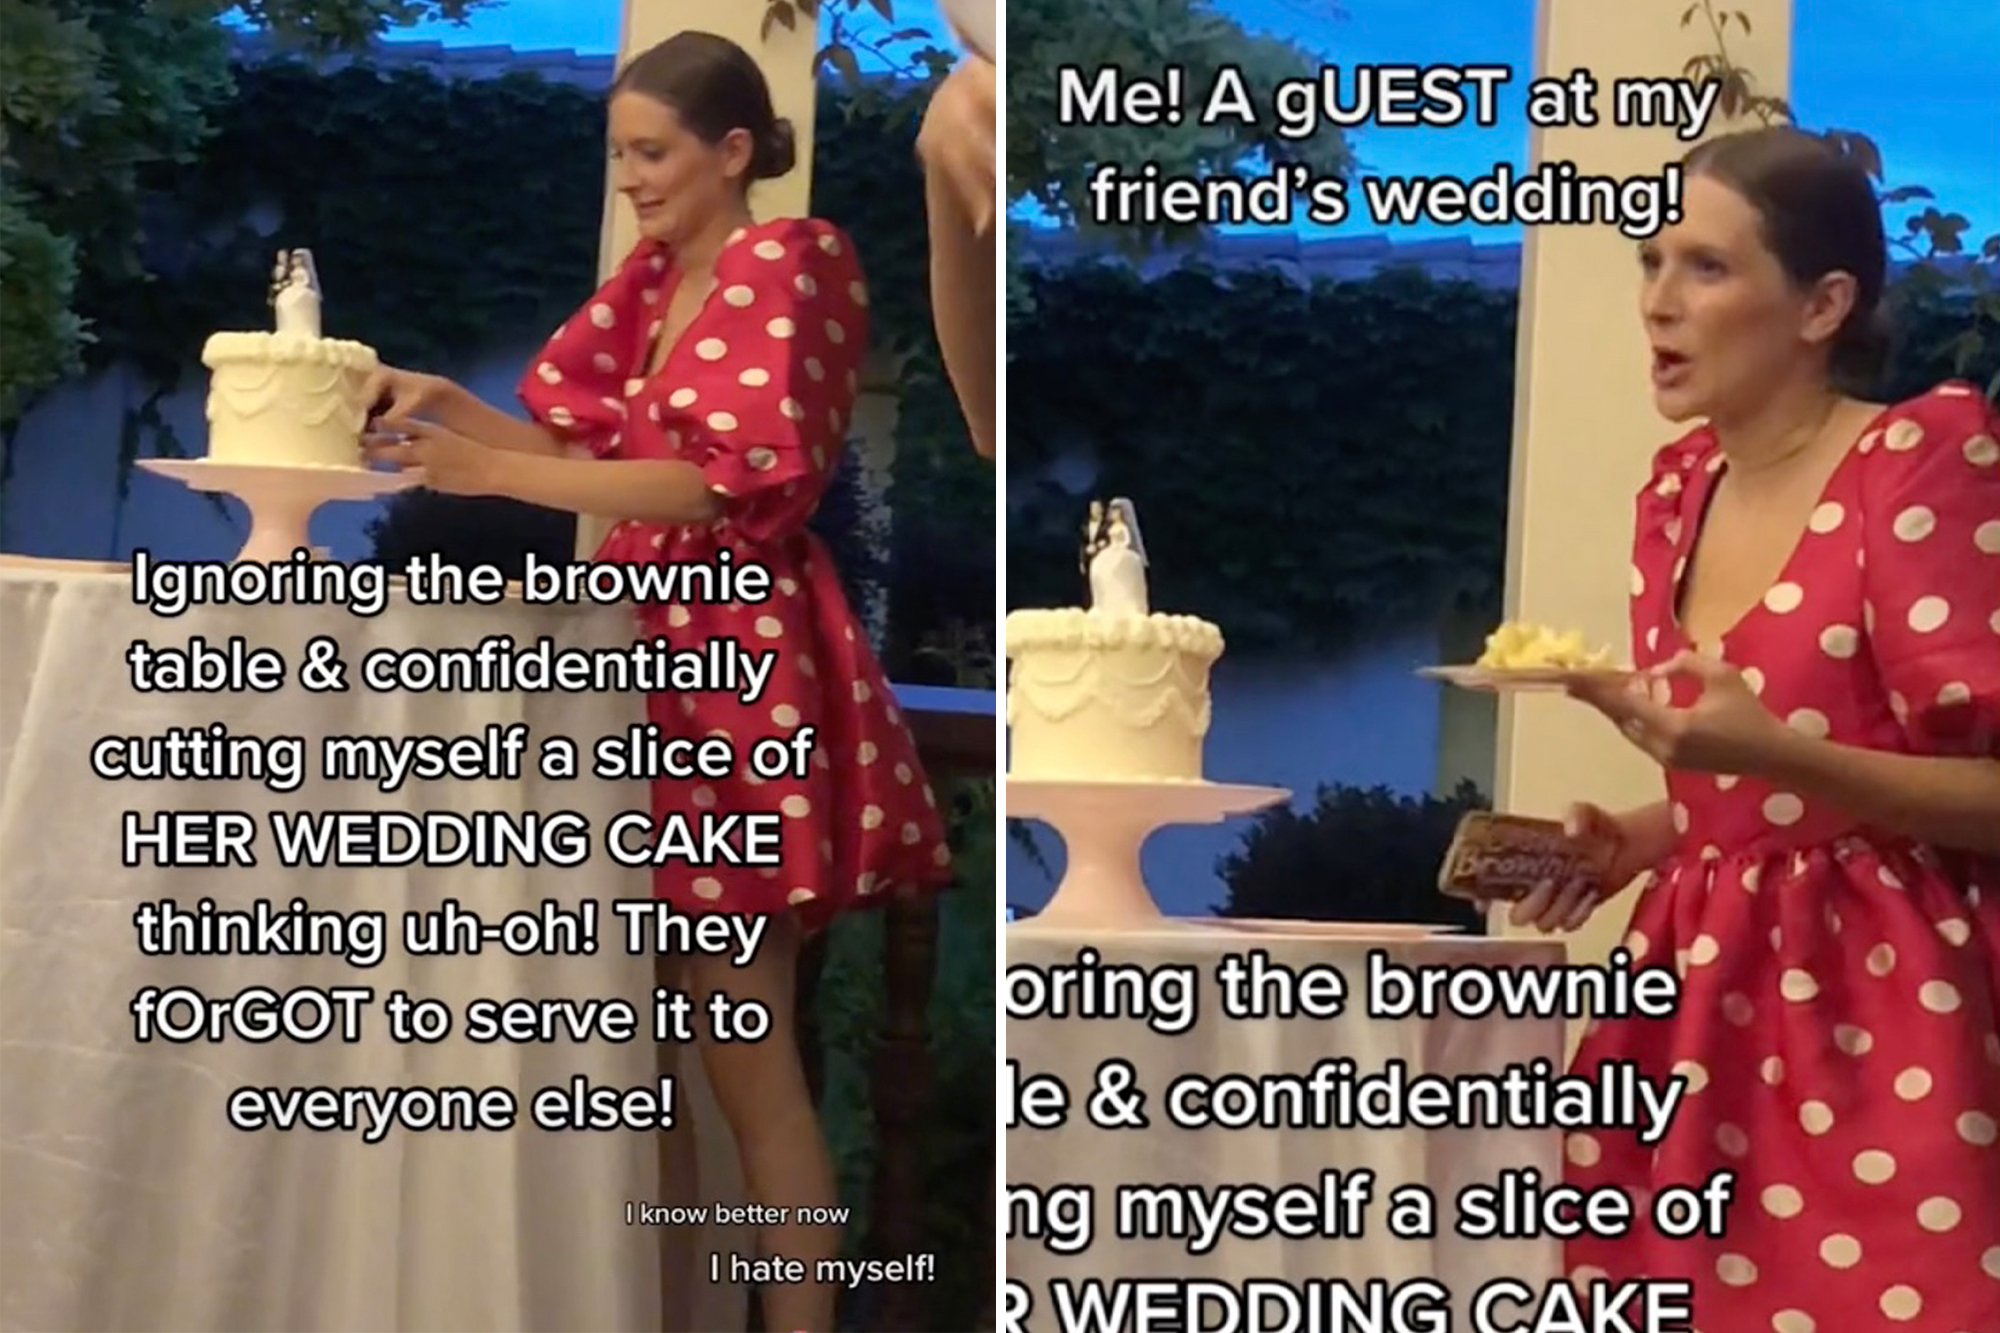 The best friend of the bride was caught on camera cutting the wedding cake, breaking wedding traditions.